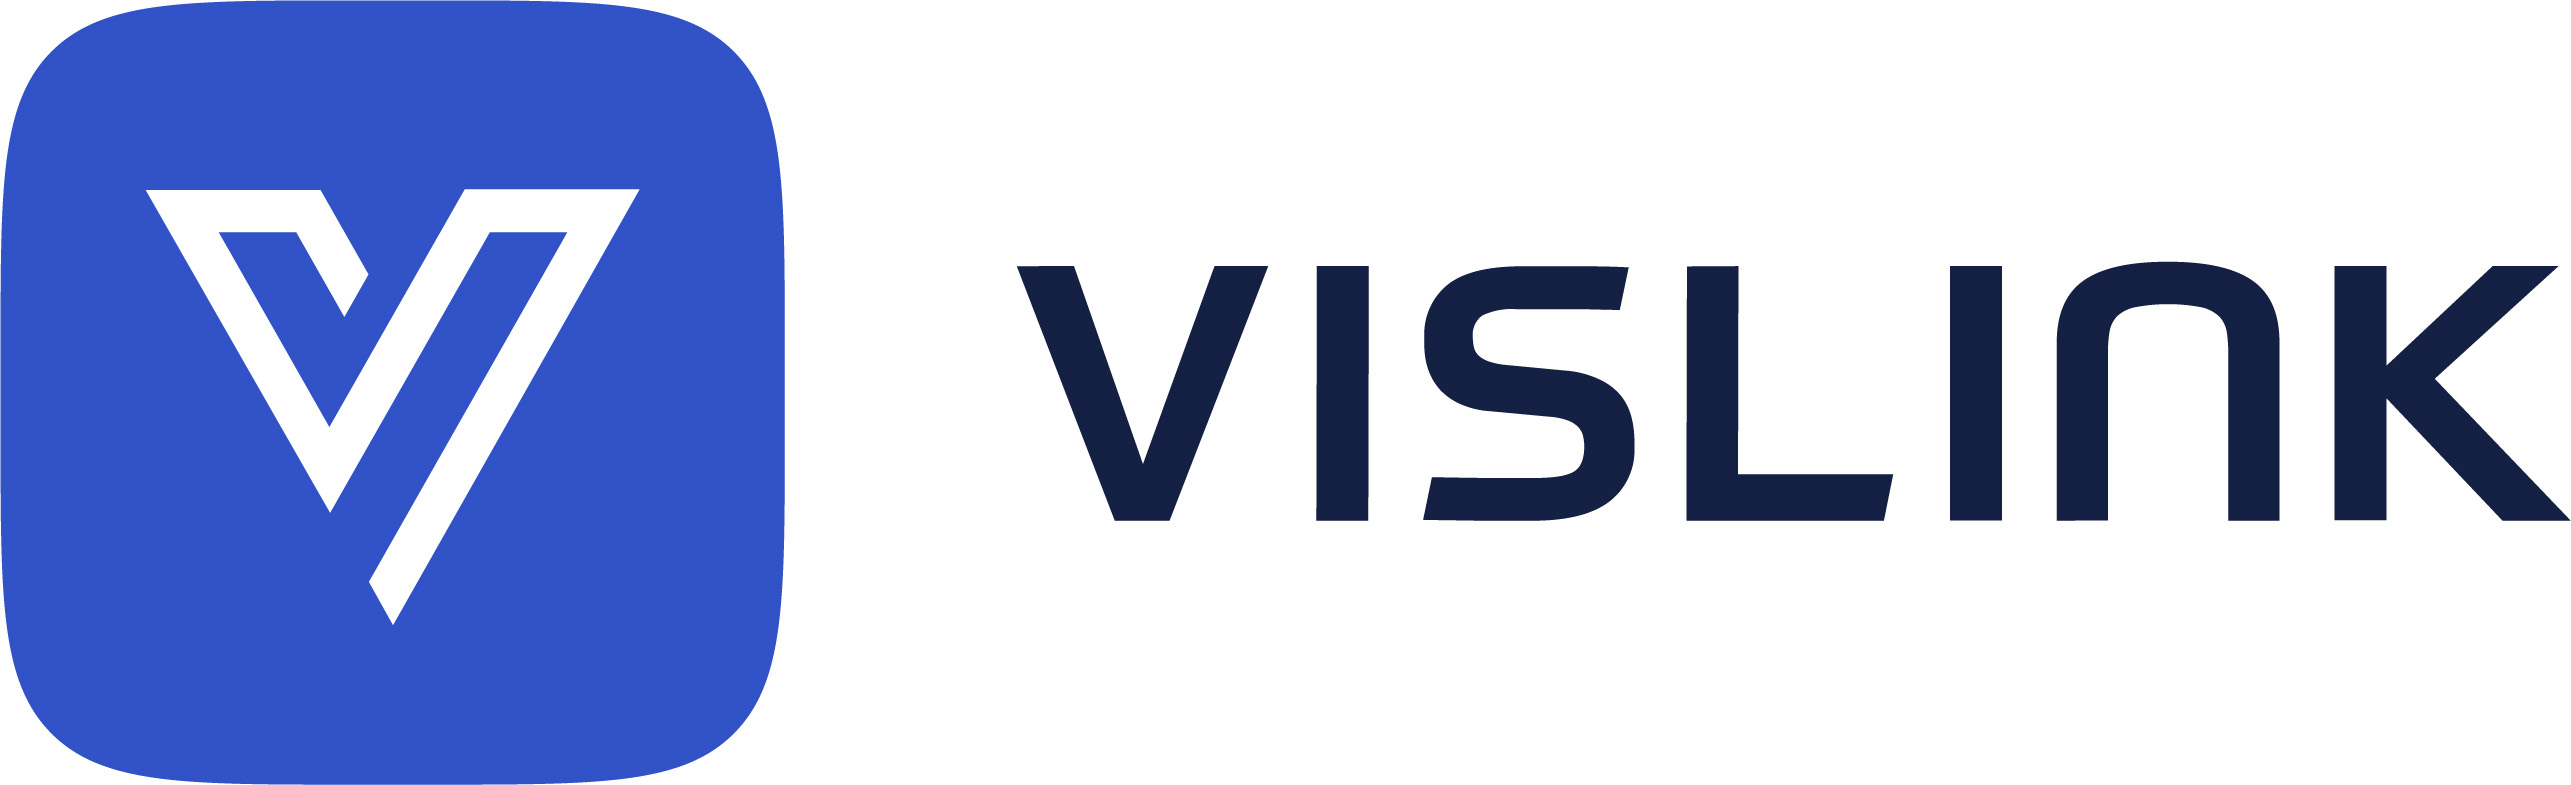 Vislink Amplifies Its Presence in U.S. Broadcast and Video Markets Via Strategic Agreement with AV Distribution Giant, JB&A